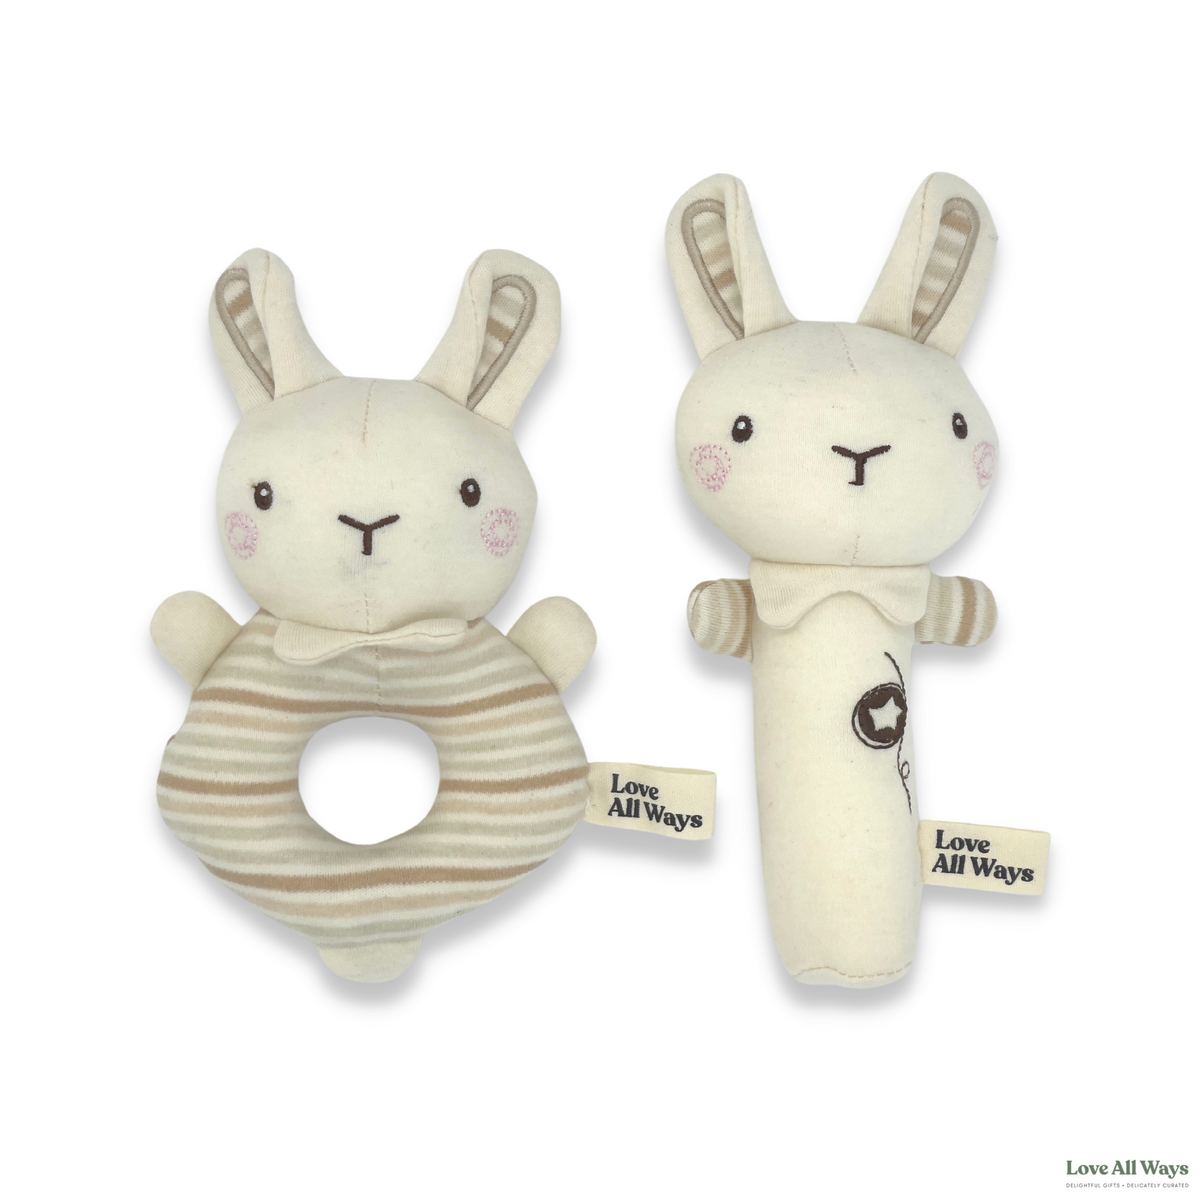 Love All Ways 100% GOTS Certified Organic Cotton Baby Rattle Set - Rosy Rabbits 2 pack